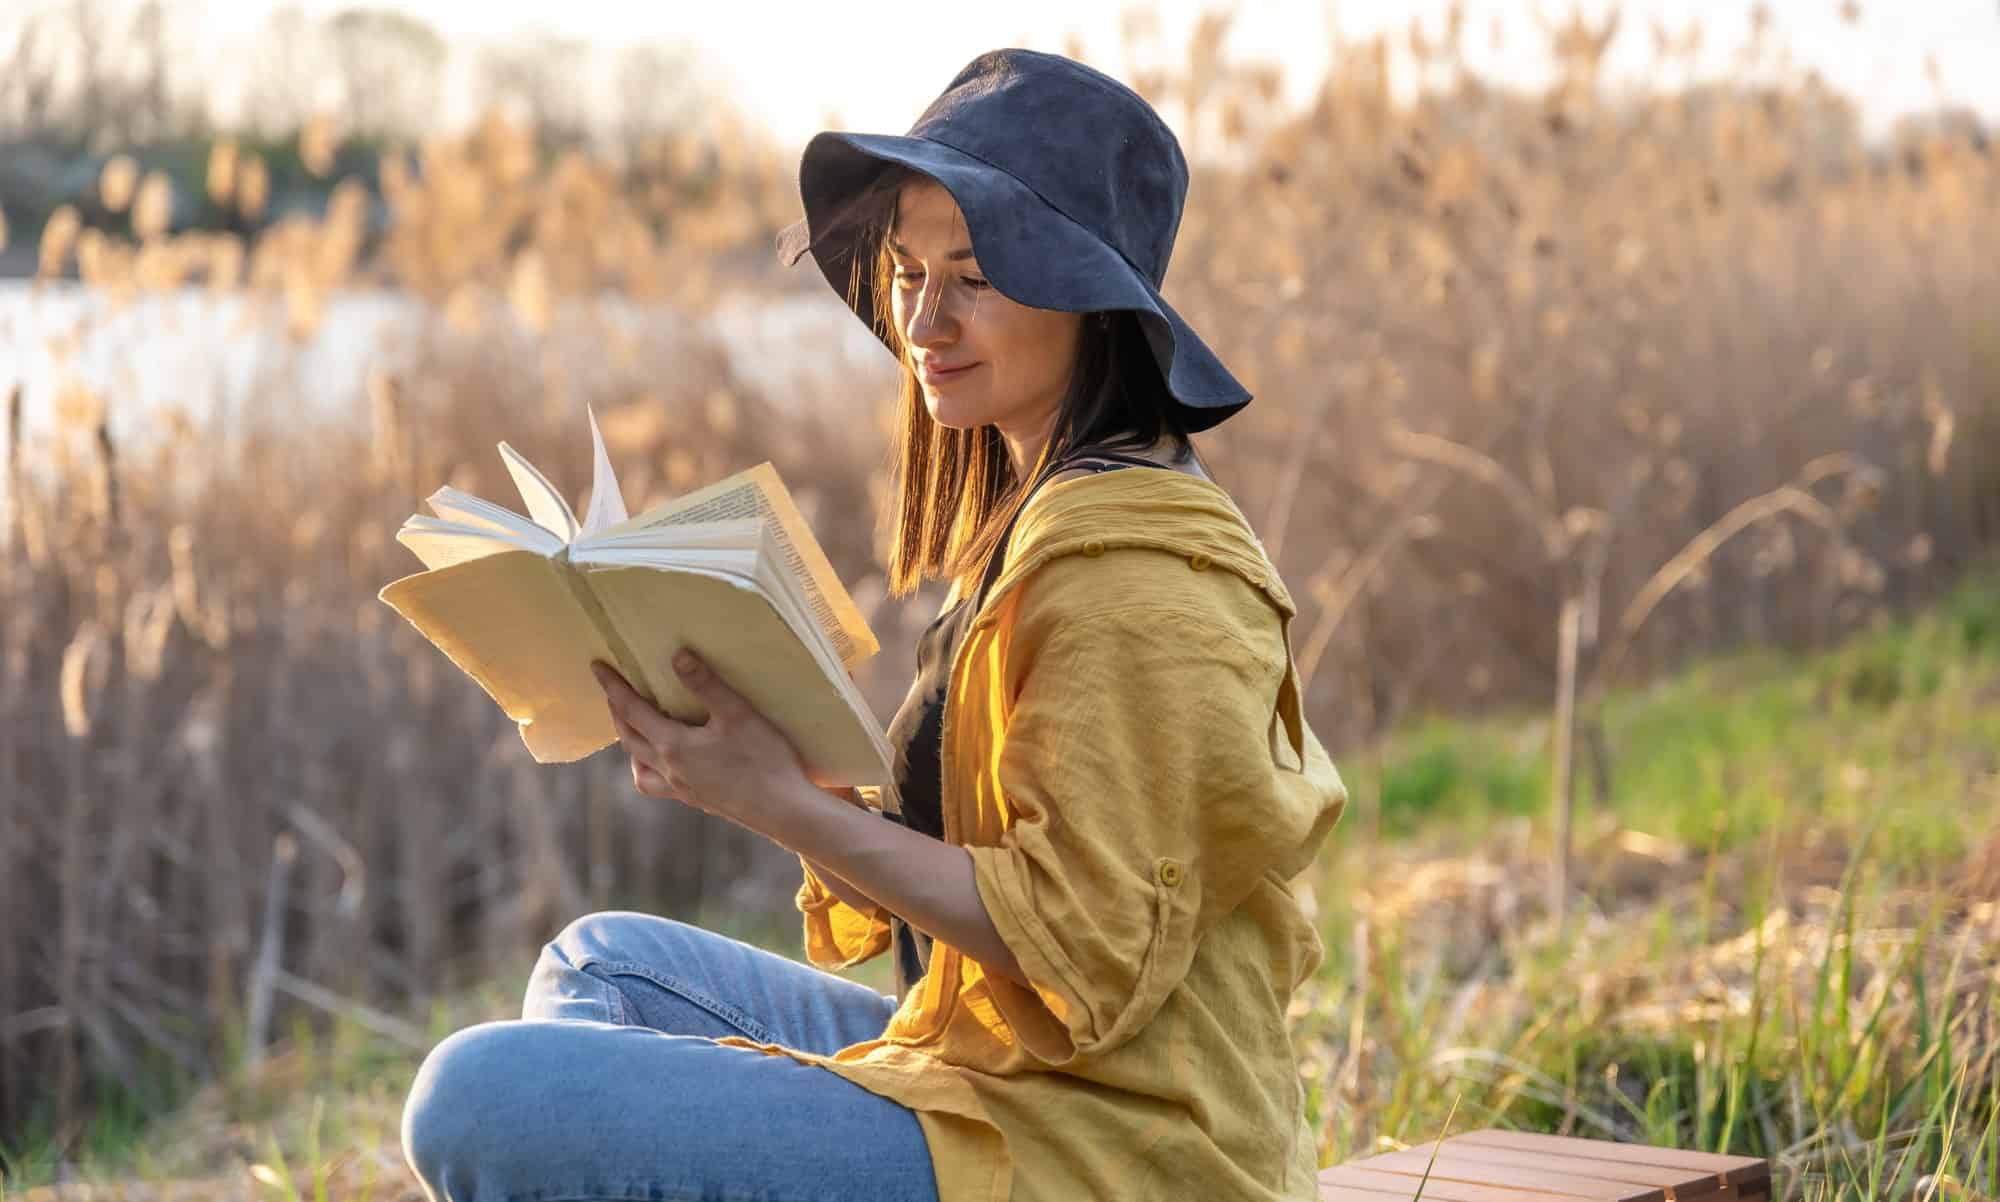 stylish-girl-with-a-book-in-her-hands-reads-at-sunset-.jpg